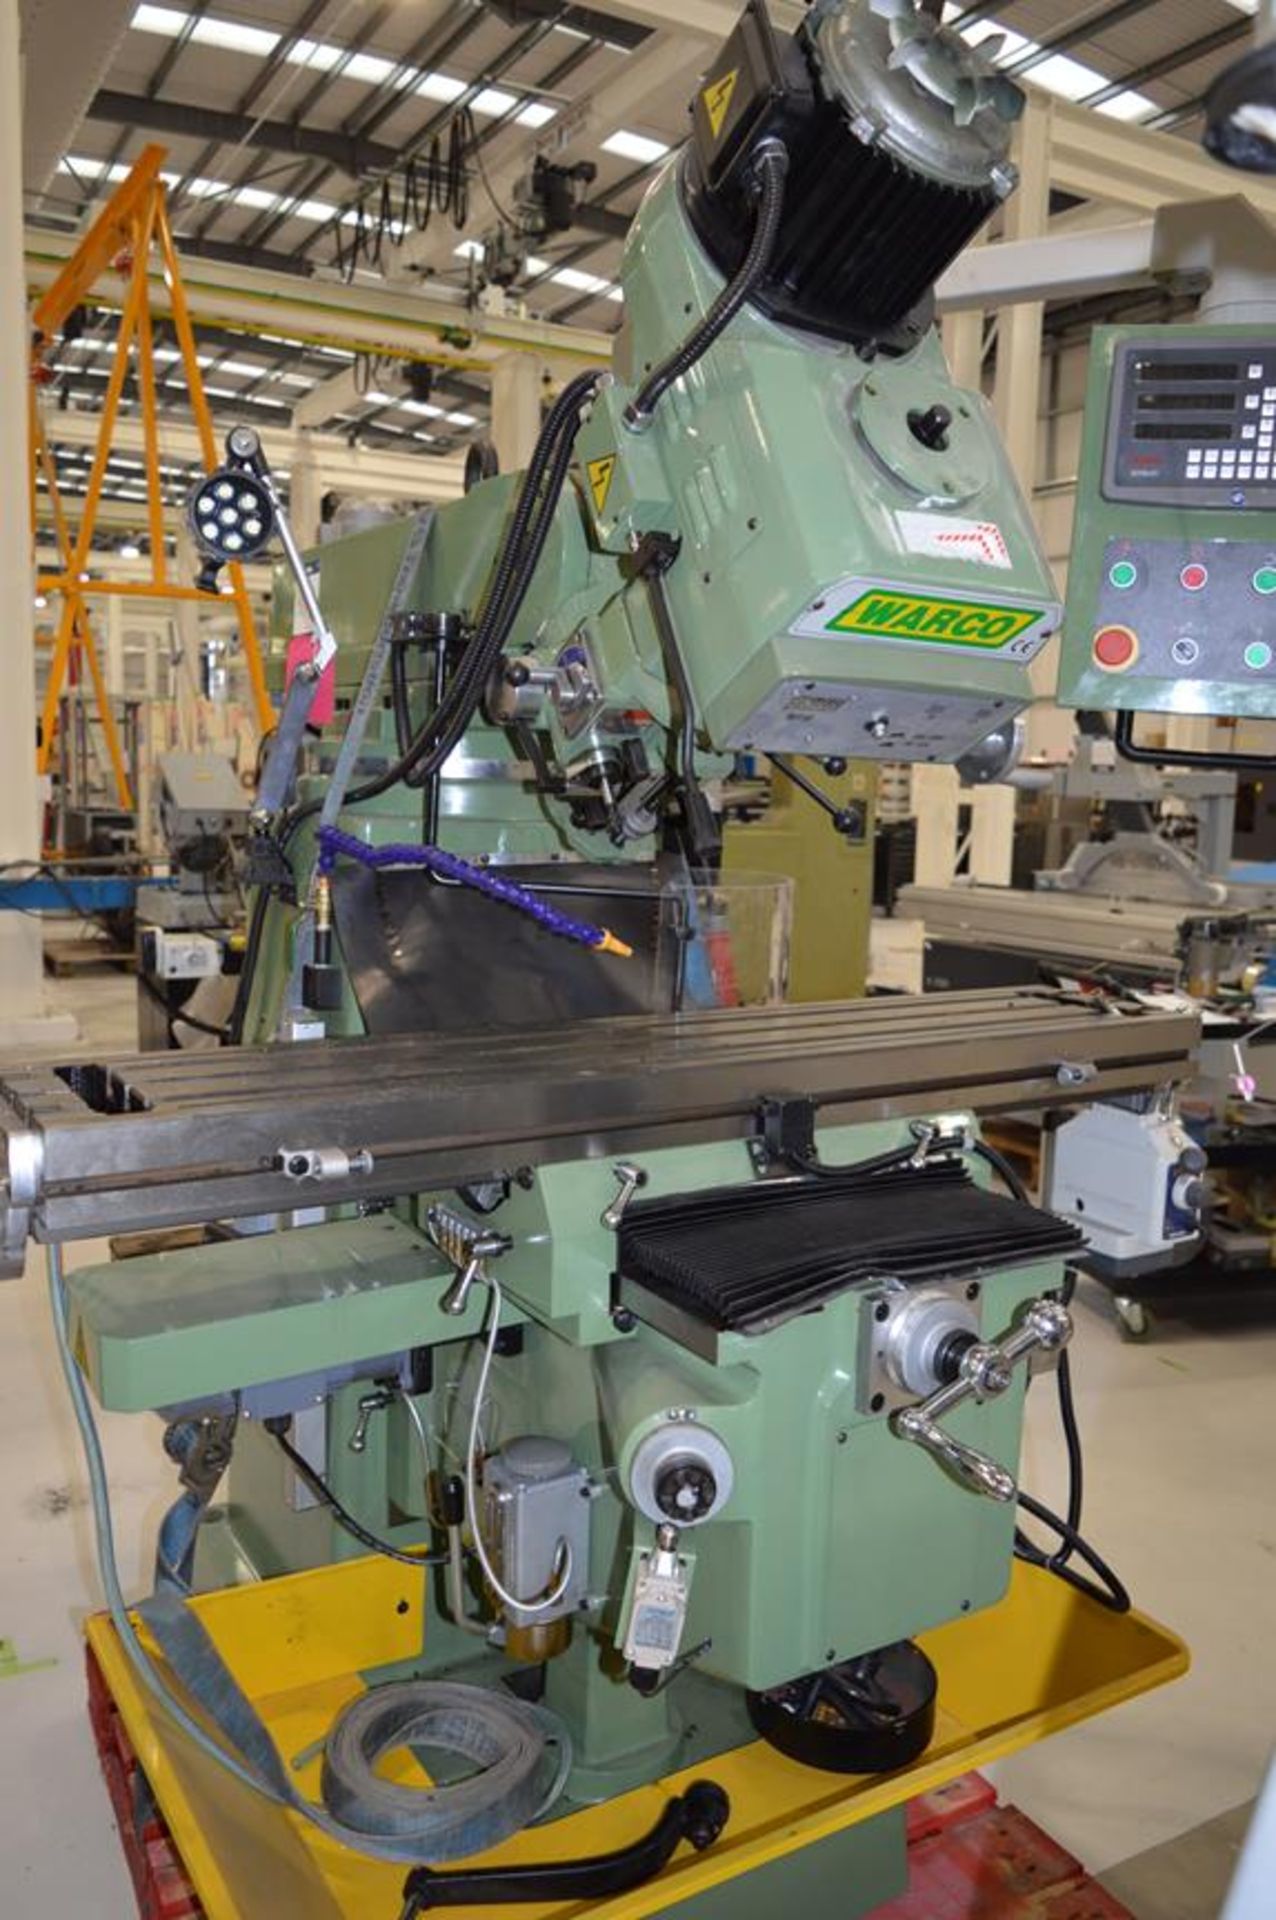 Warco, WM40 turret head milling machine, Serial No. 1910107 (DOM: 2021) with Sinc SDS6-3V DRO and po